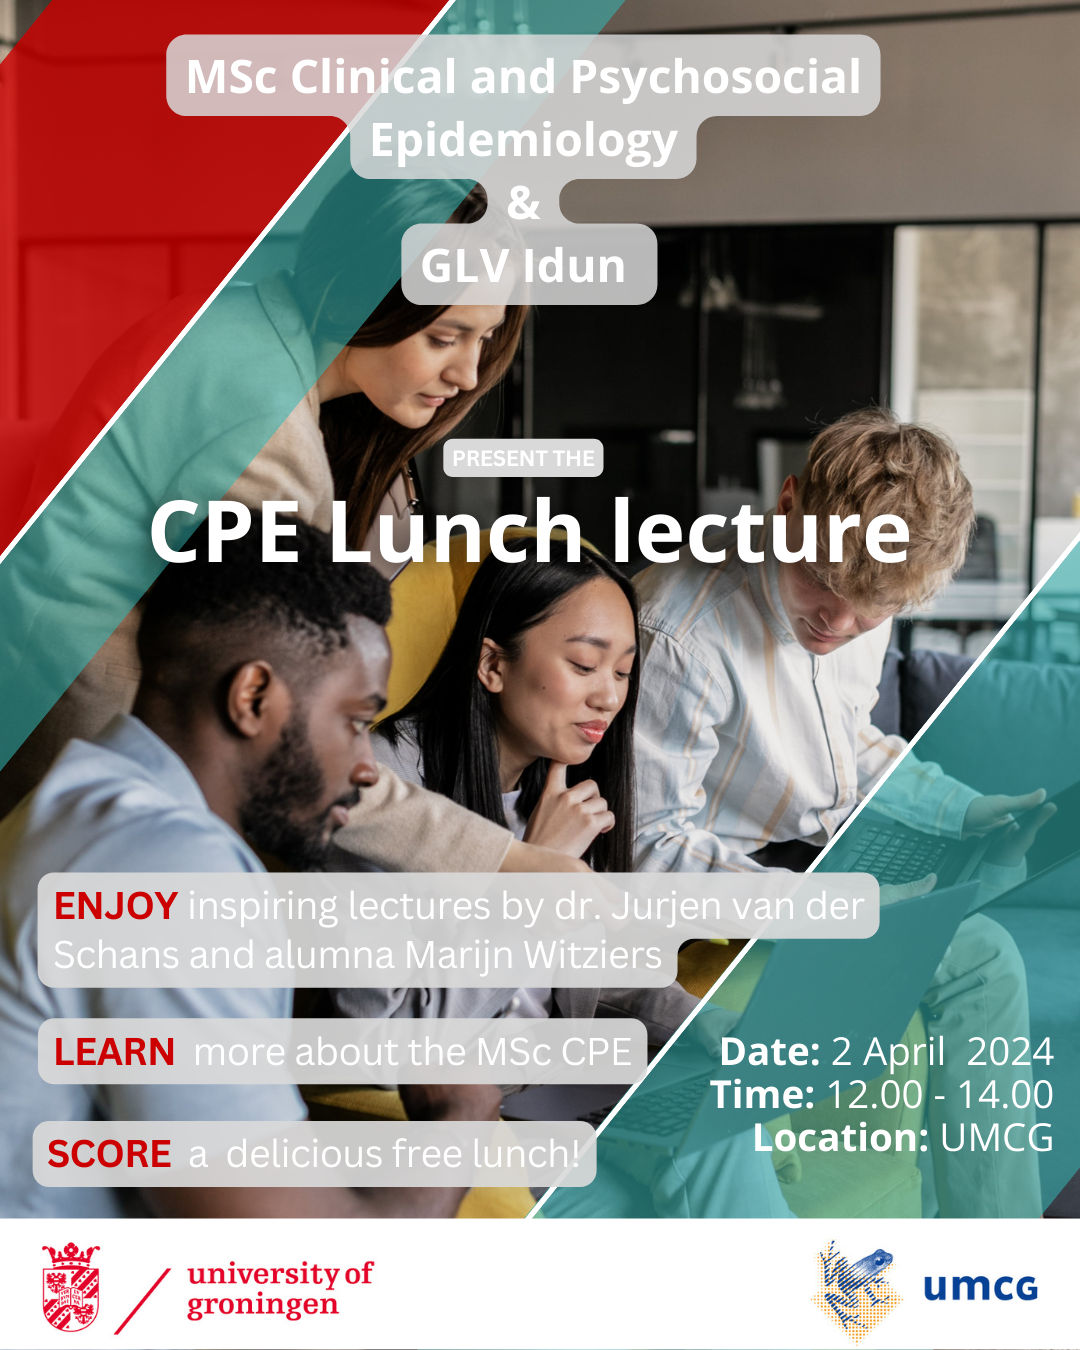 CPE lunch lecture